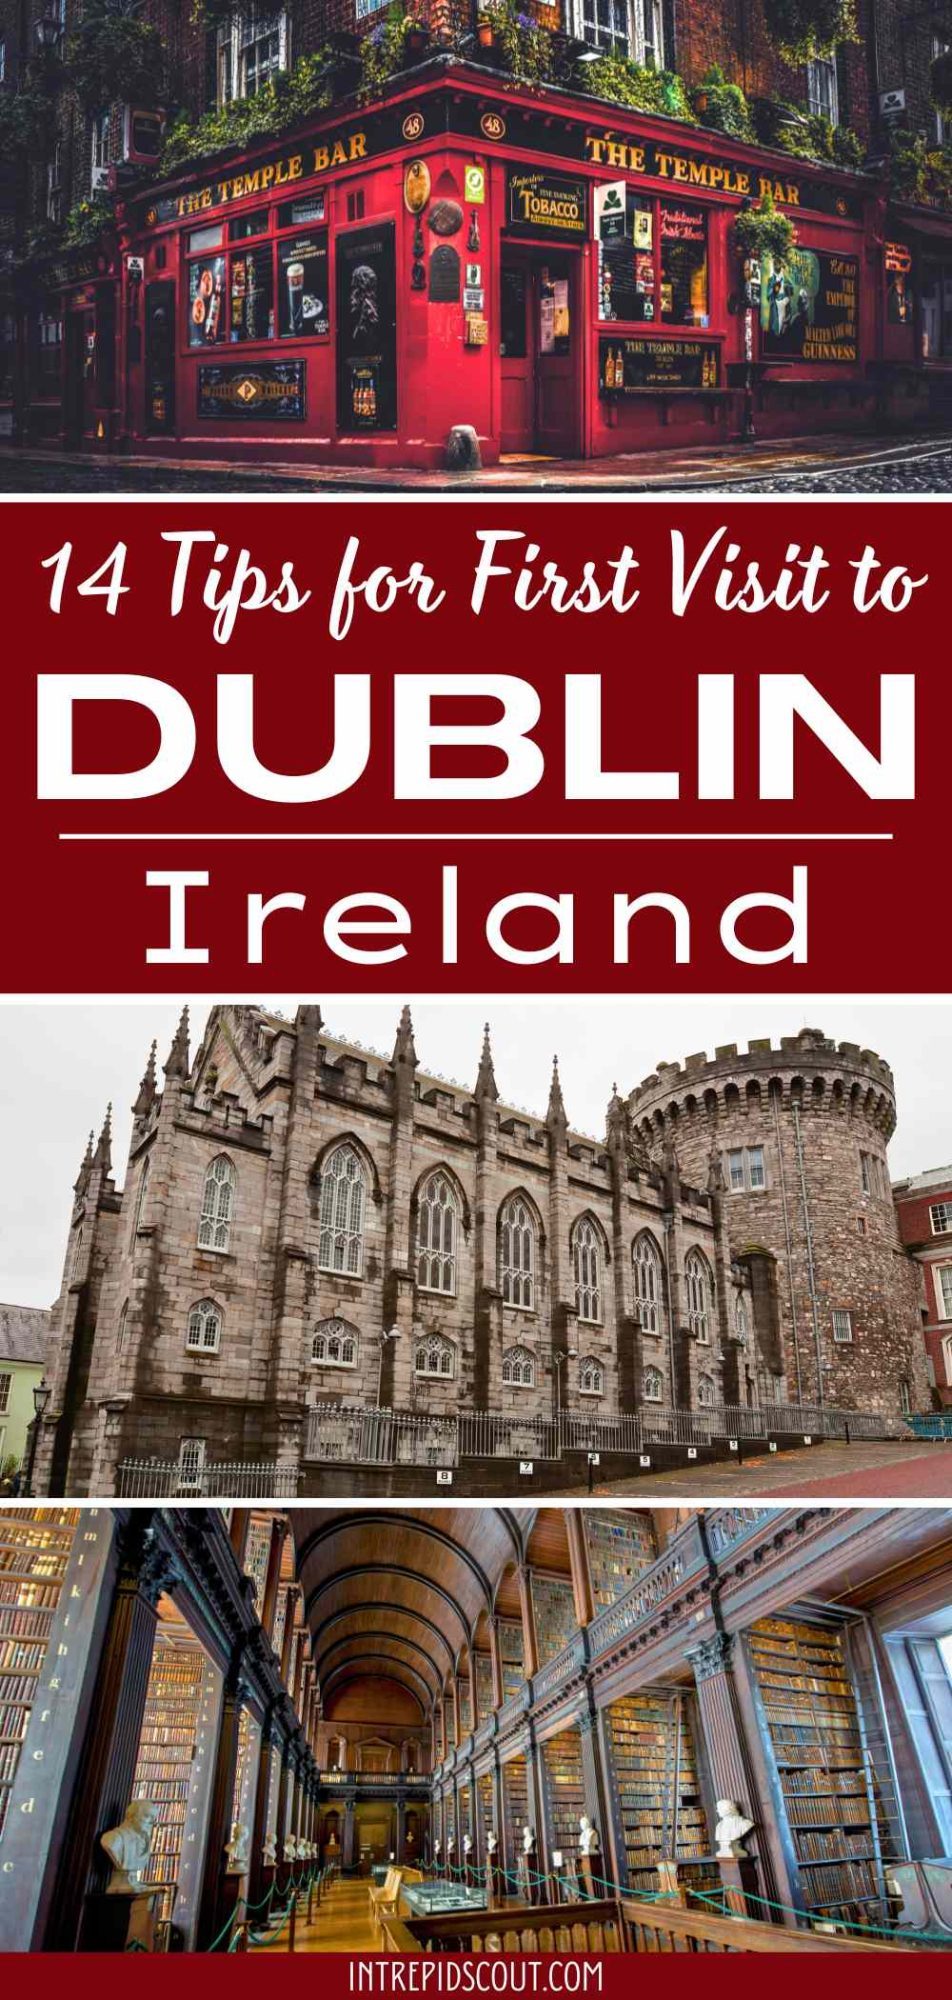 Tips for First Visit to Dublin